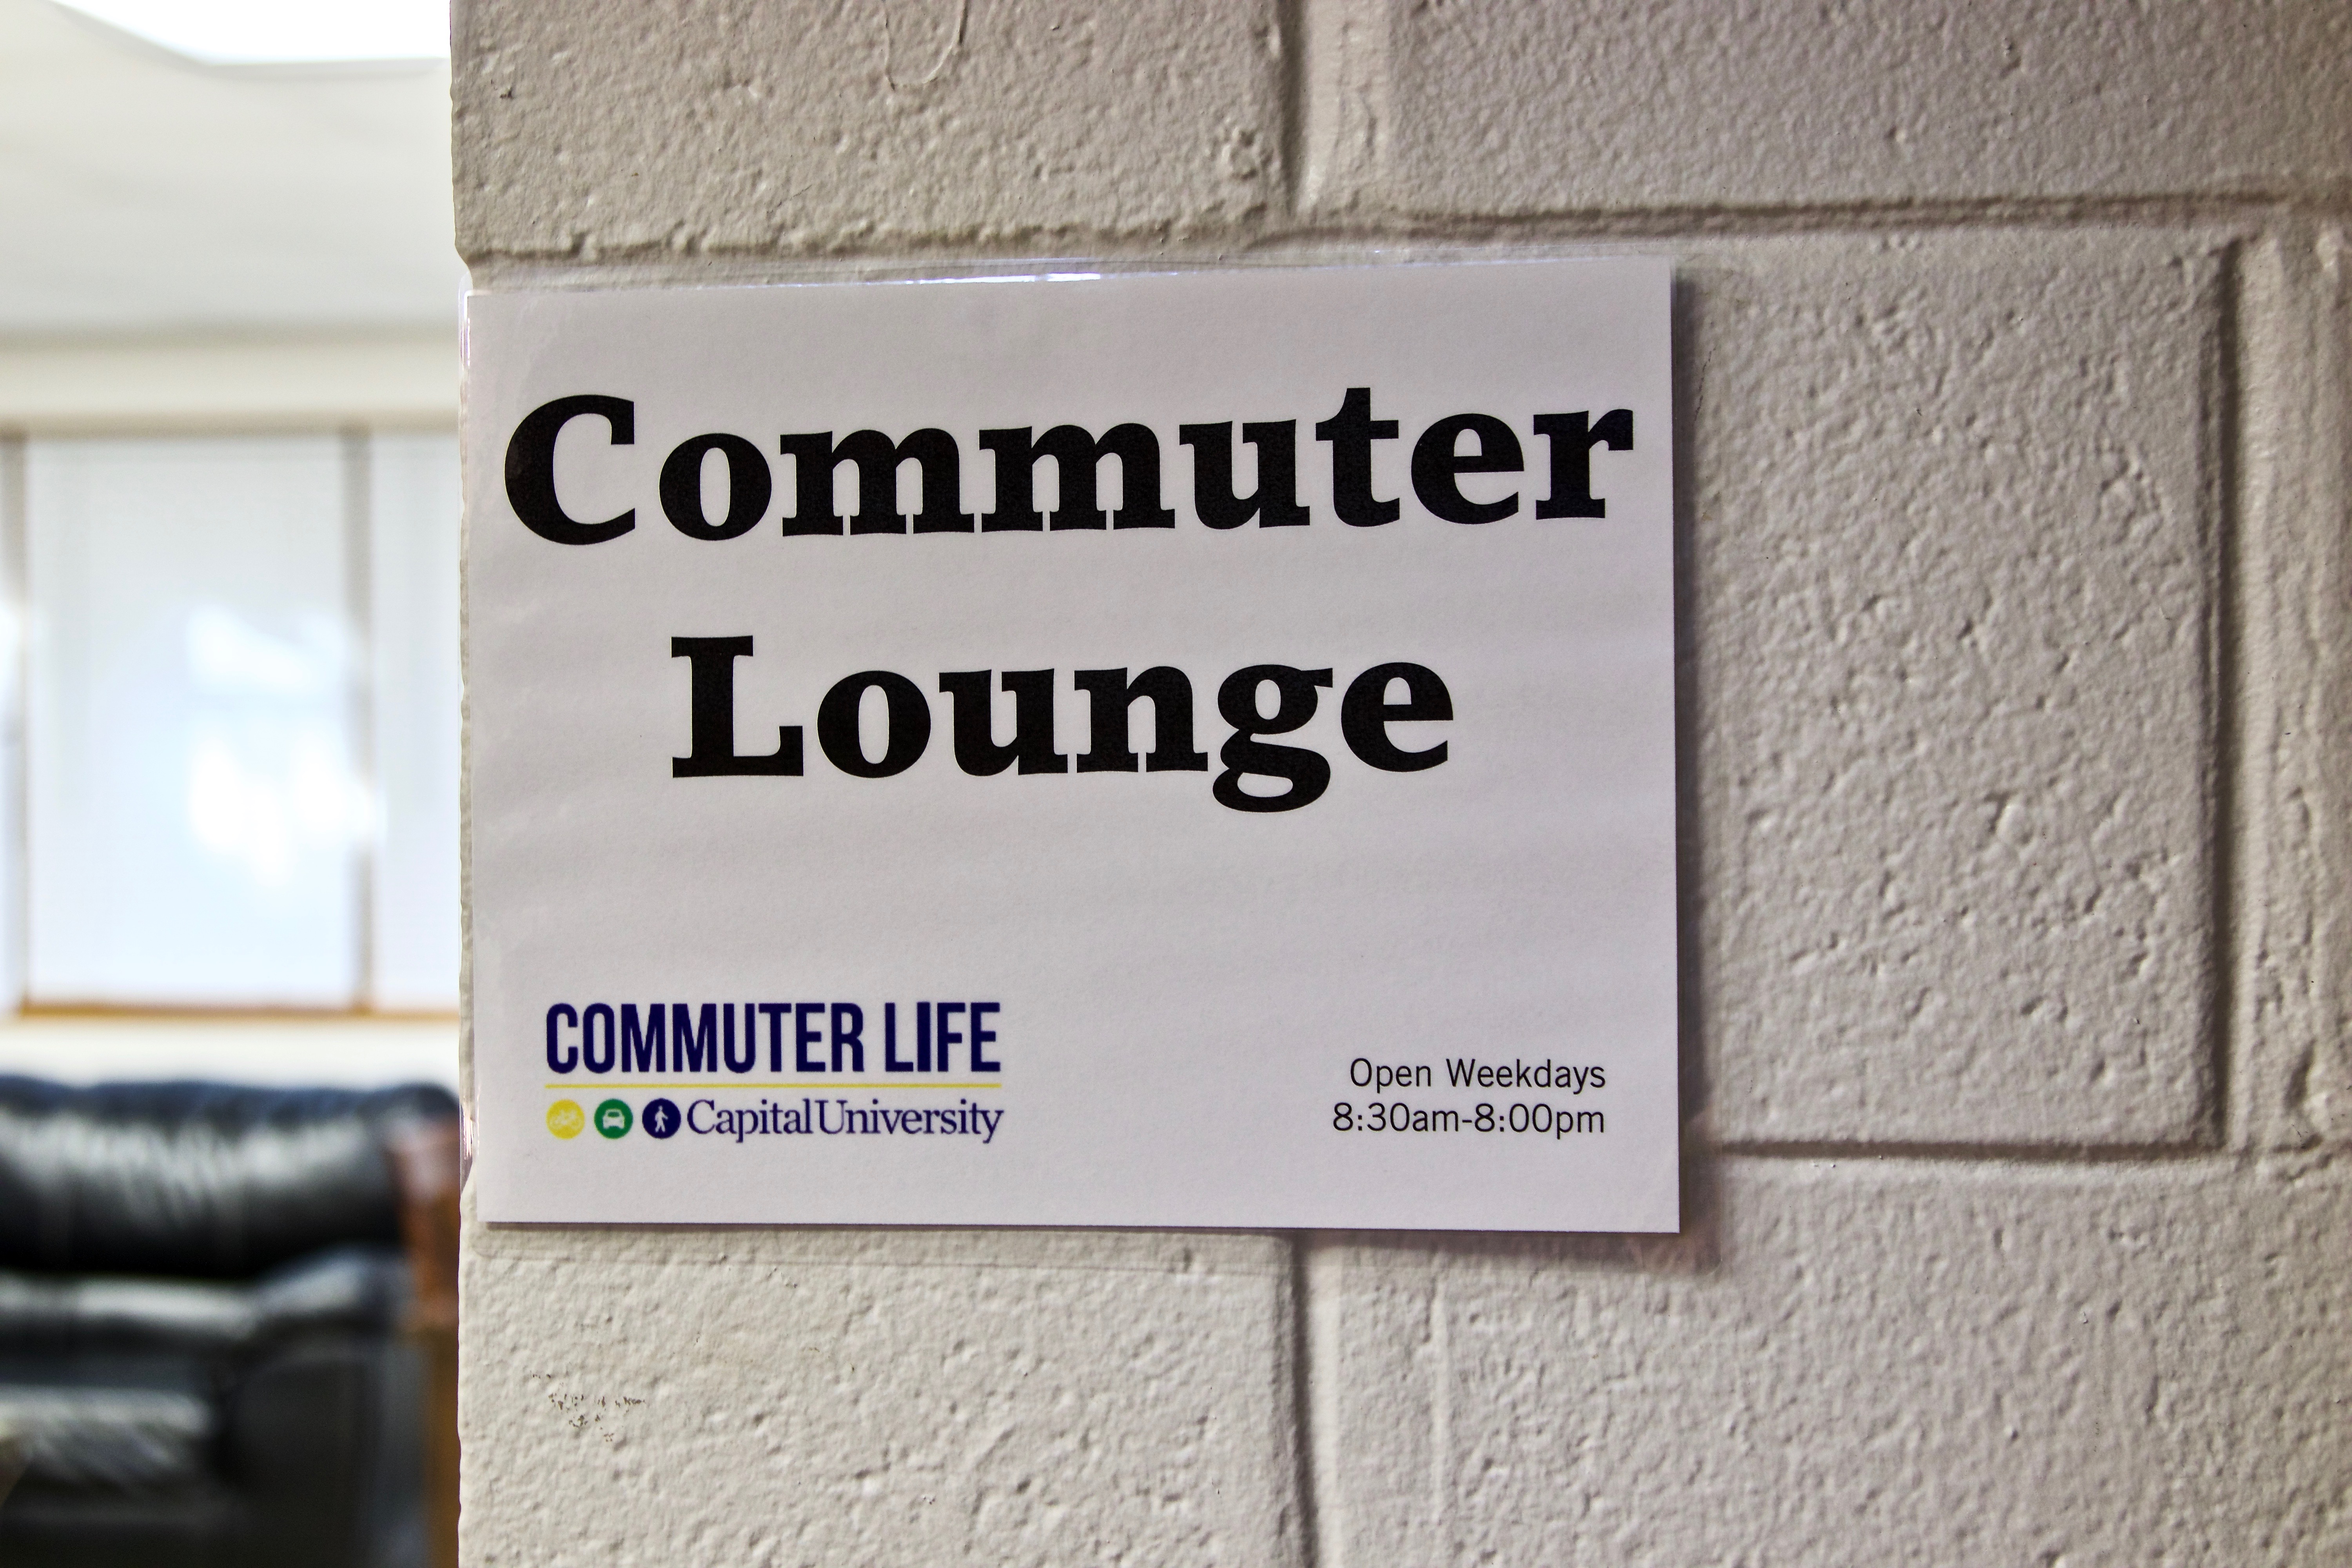 OK Commuter: Capital opens new lounge for commuter students